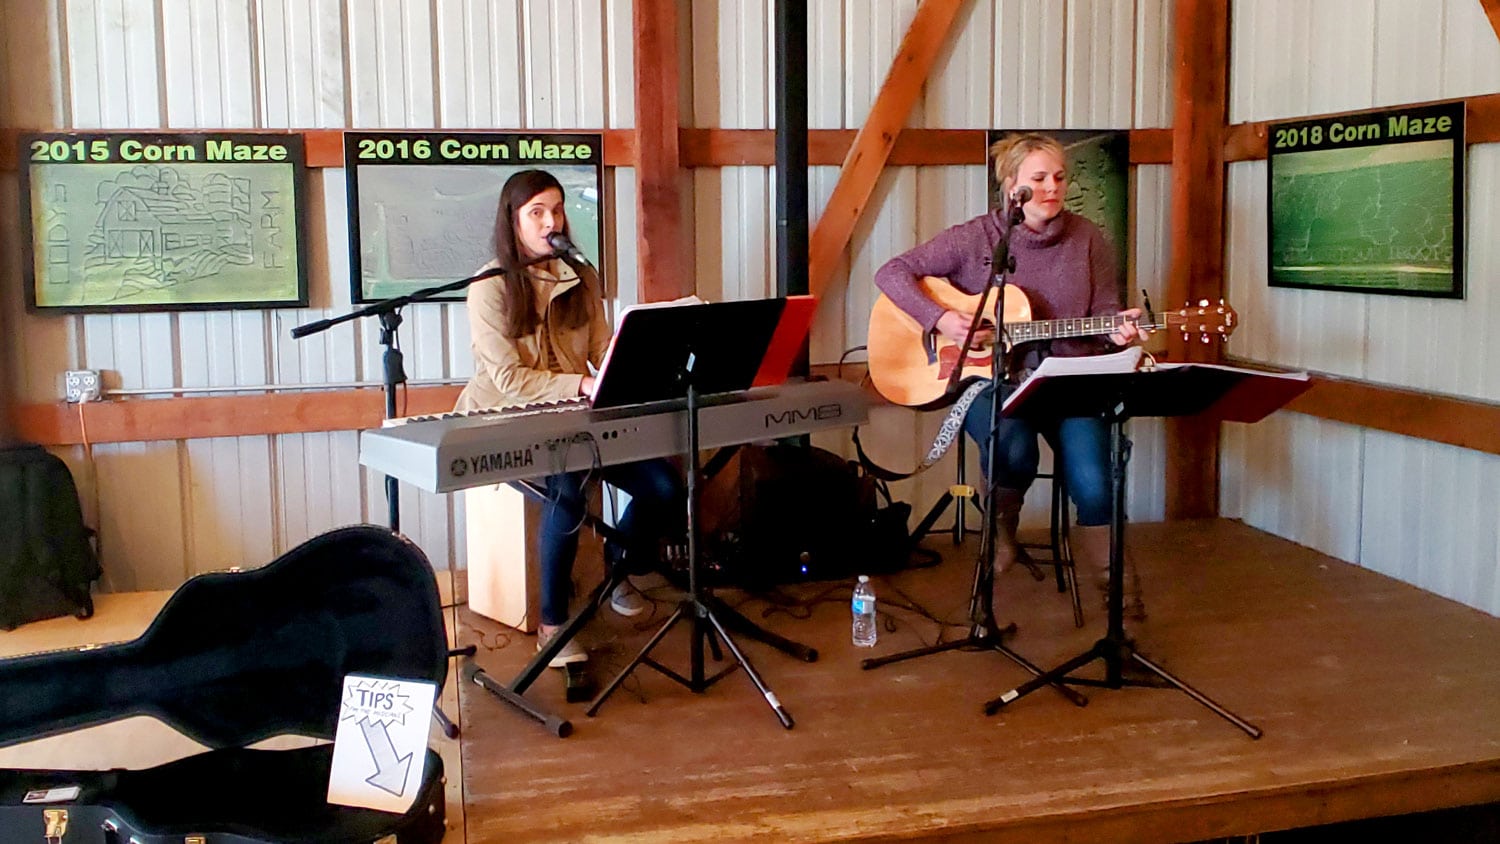 Live music at Cody's Farm and Orchard.